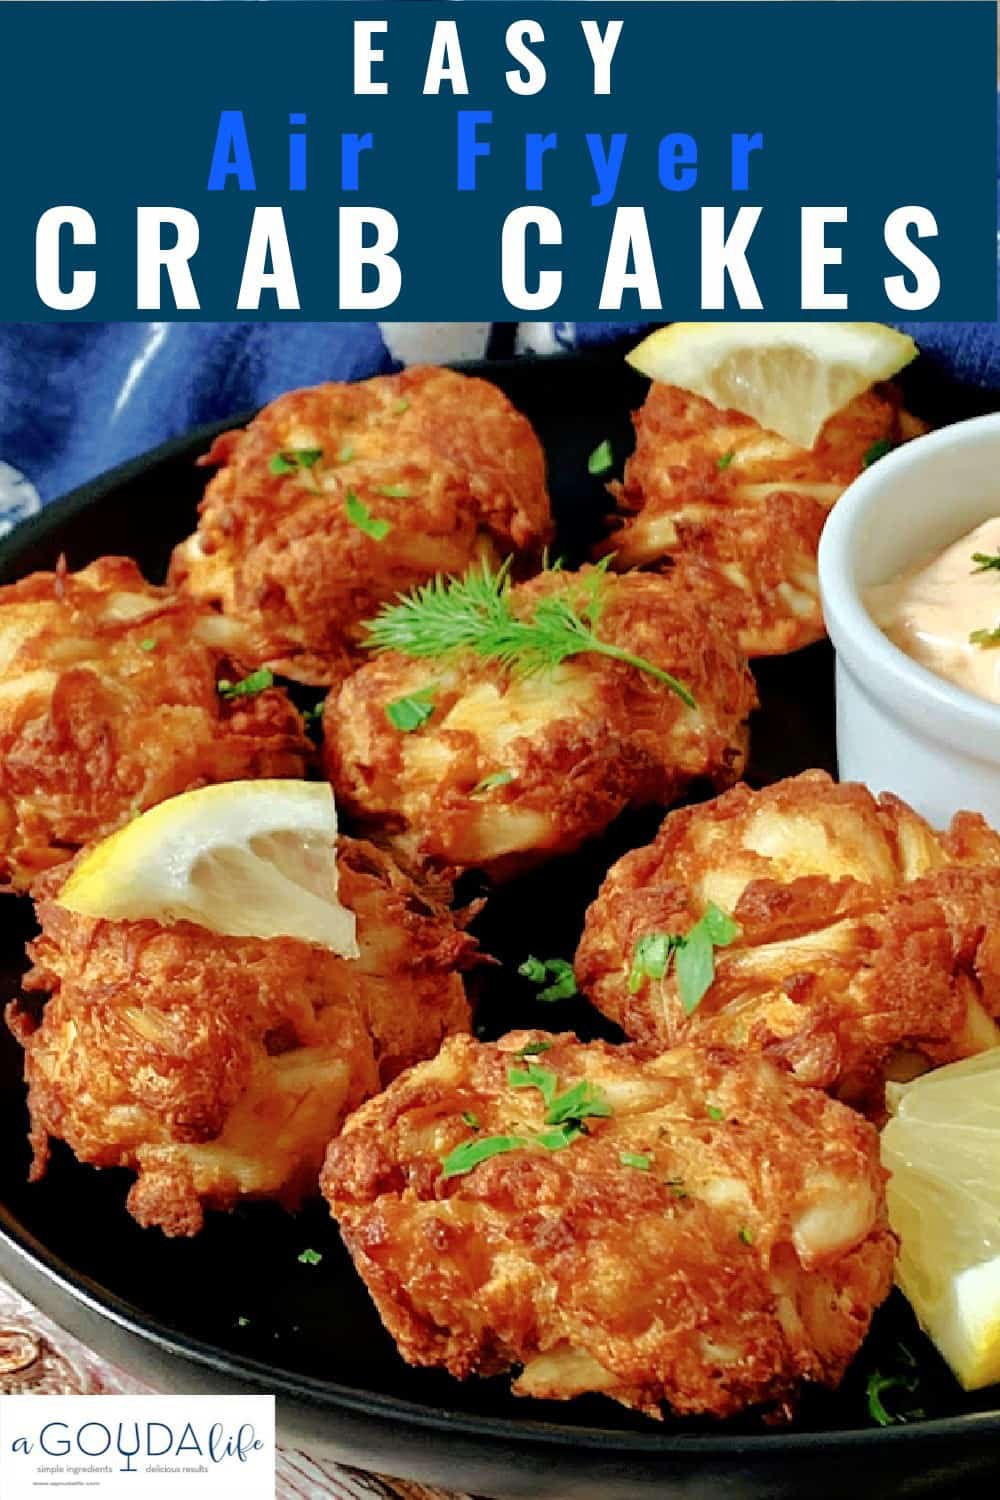 pinterest pin showing plate of crab cakes garnished with dill sprig